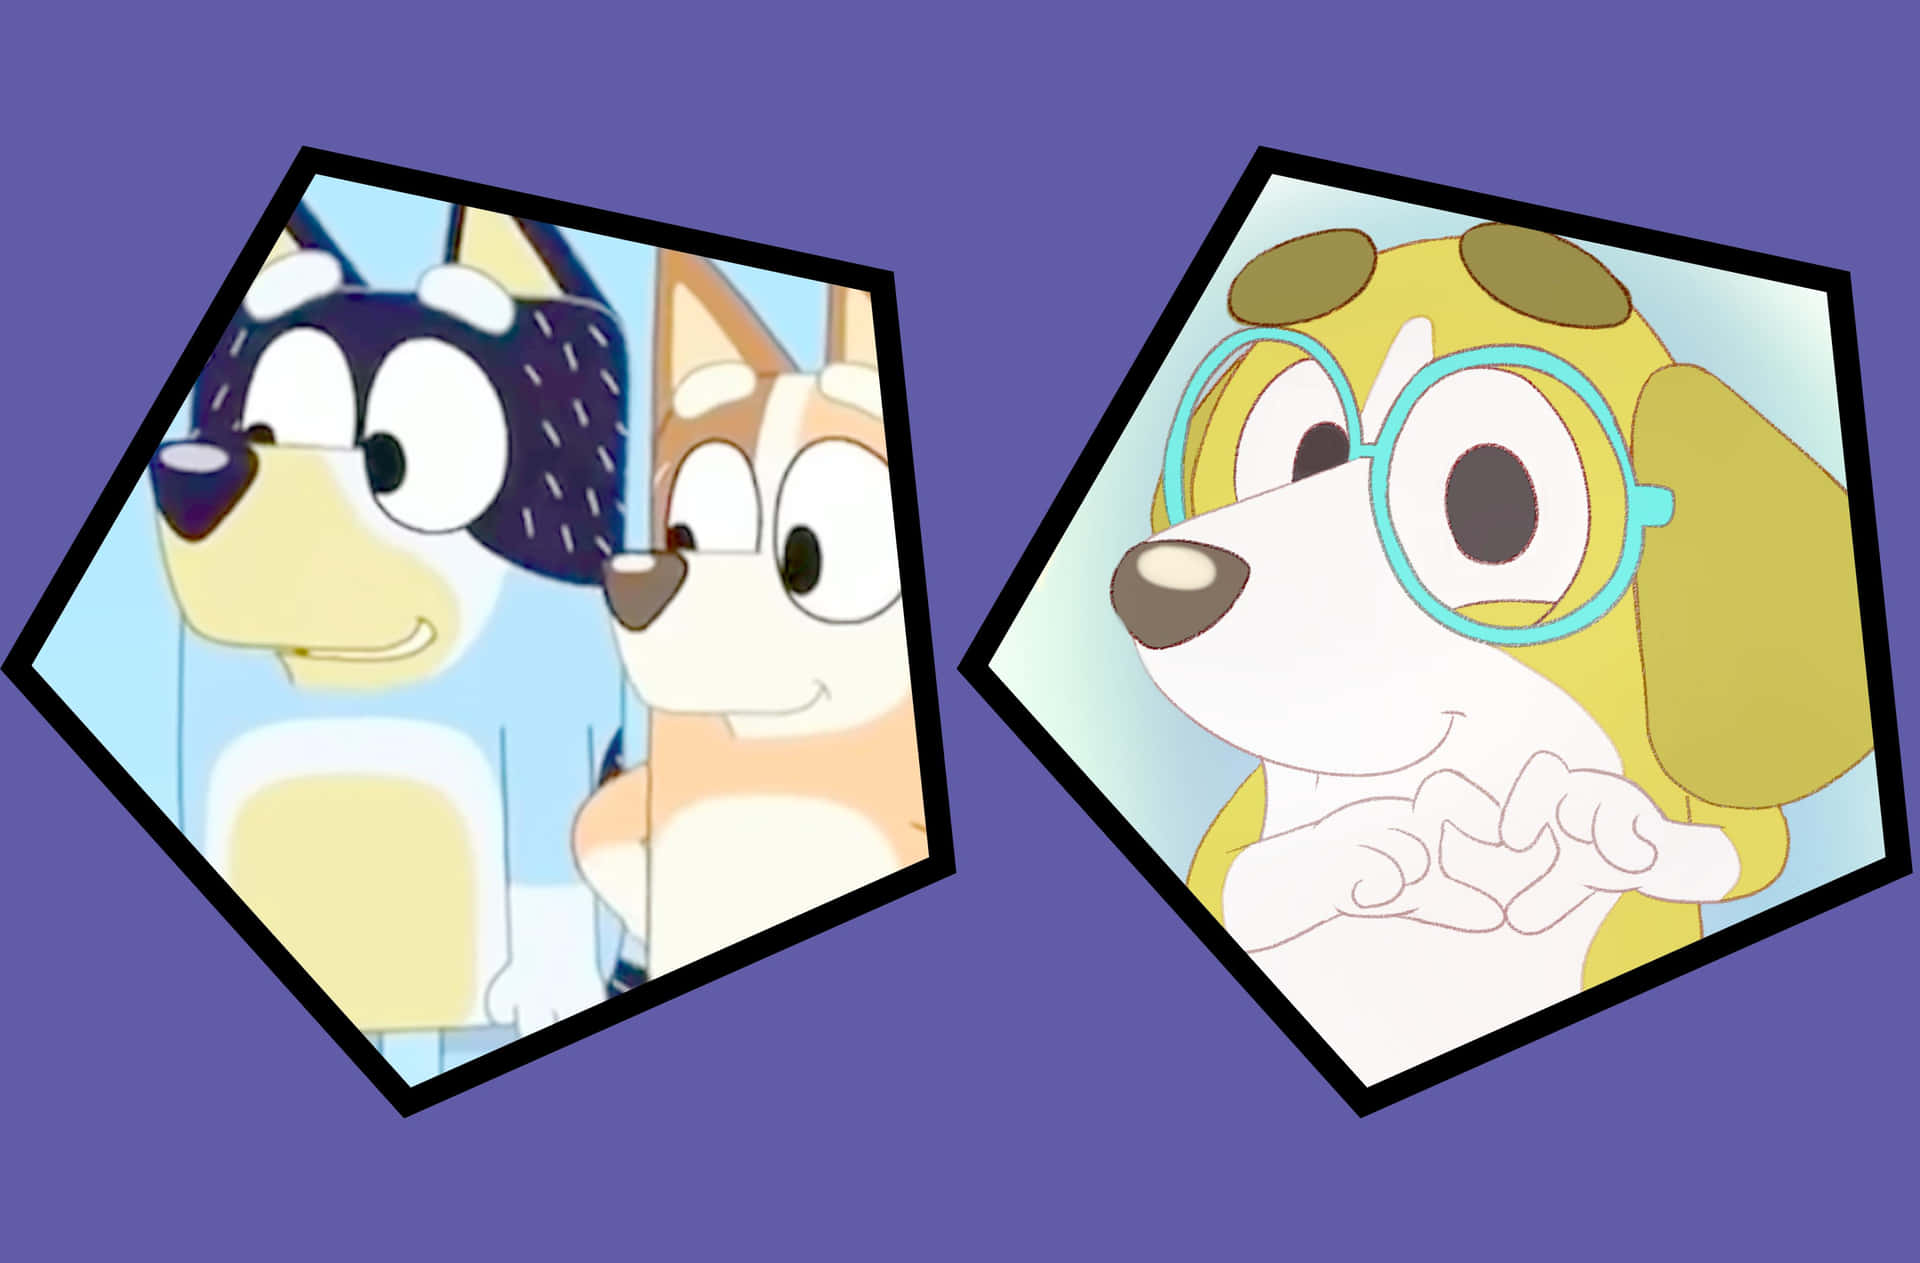 Two Cartoon Dogs With Glasses And A Purple Background